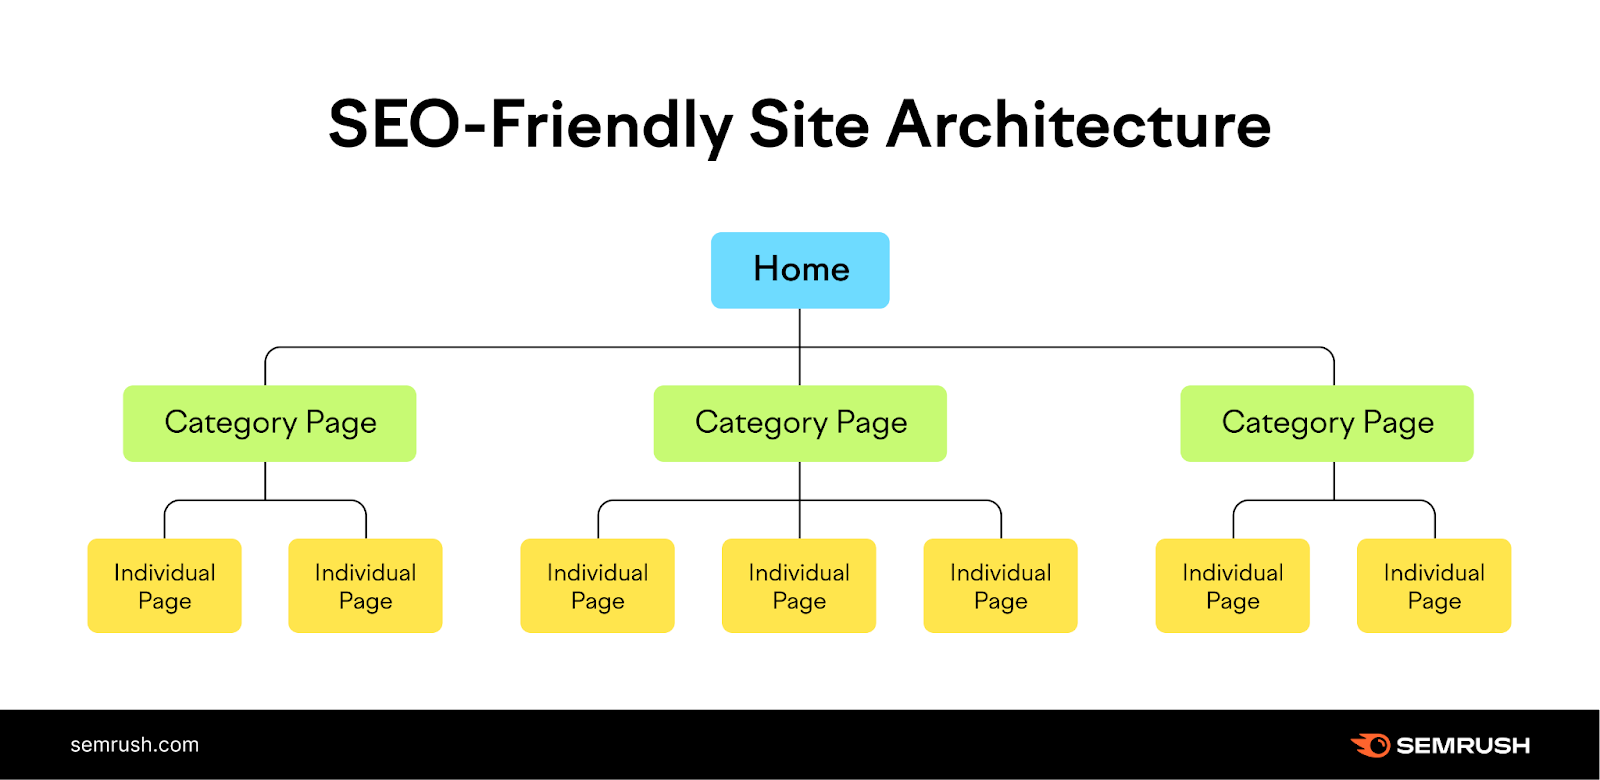 An infographic showing an SEO-friendly site architecture example